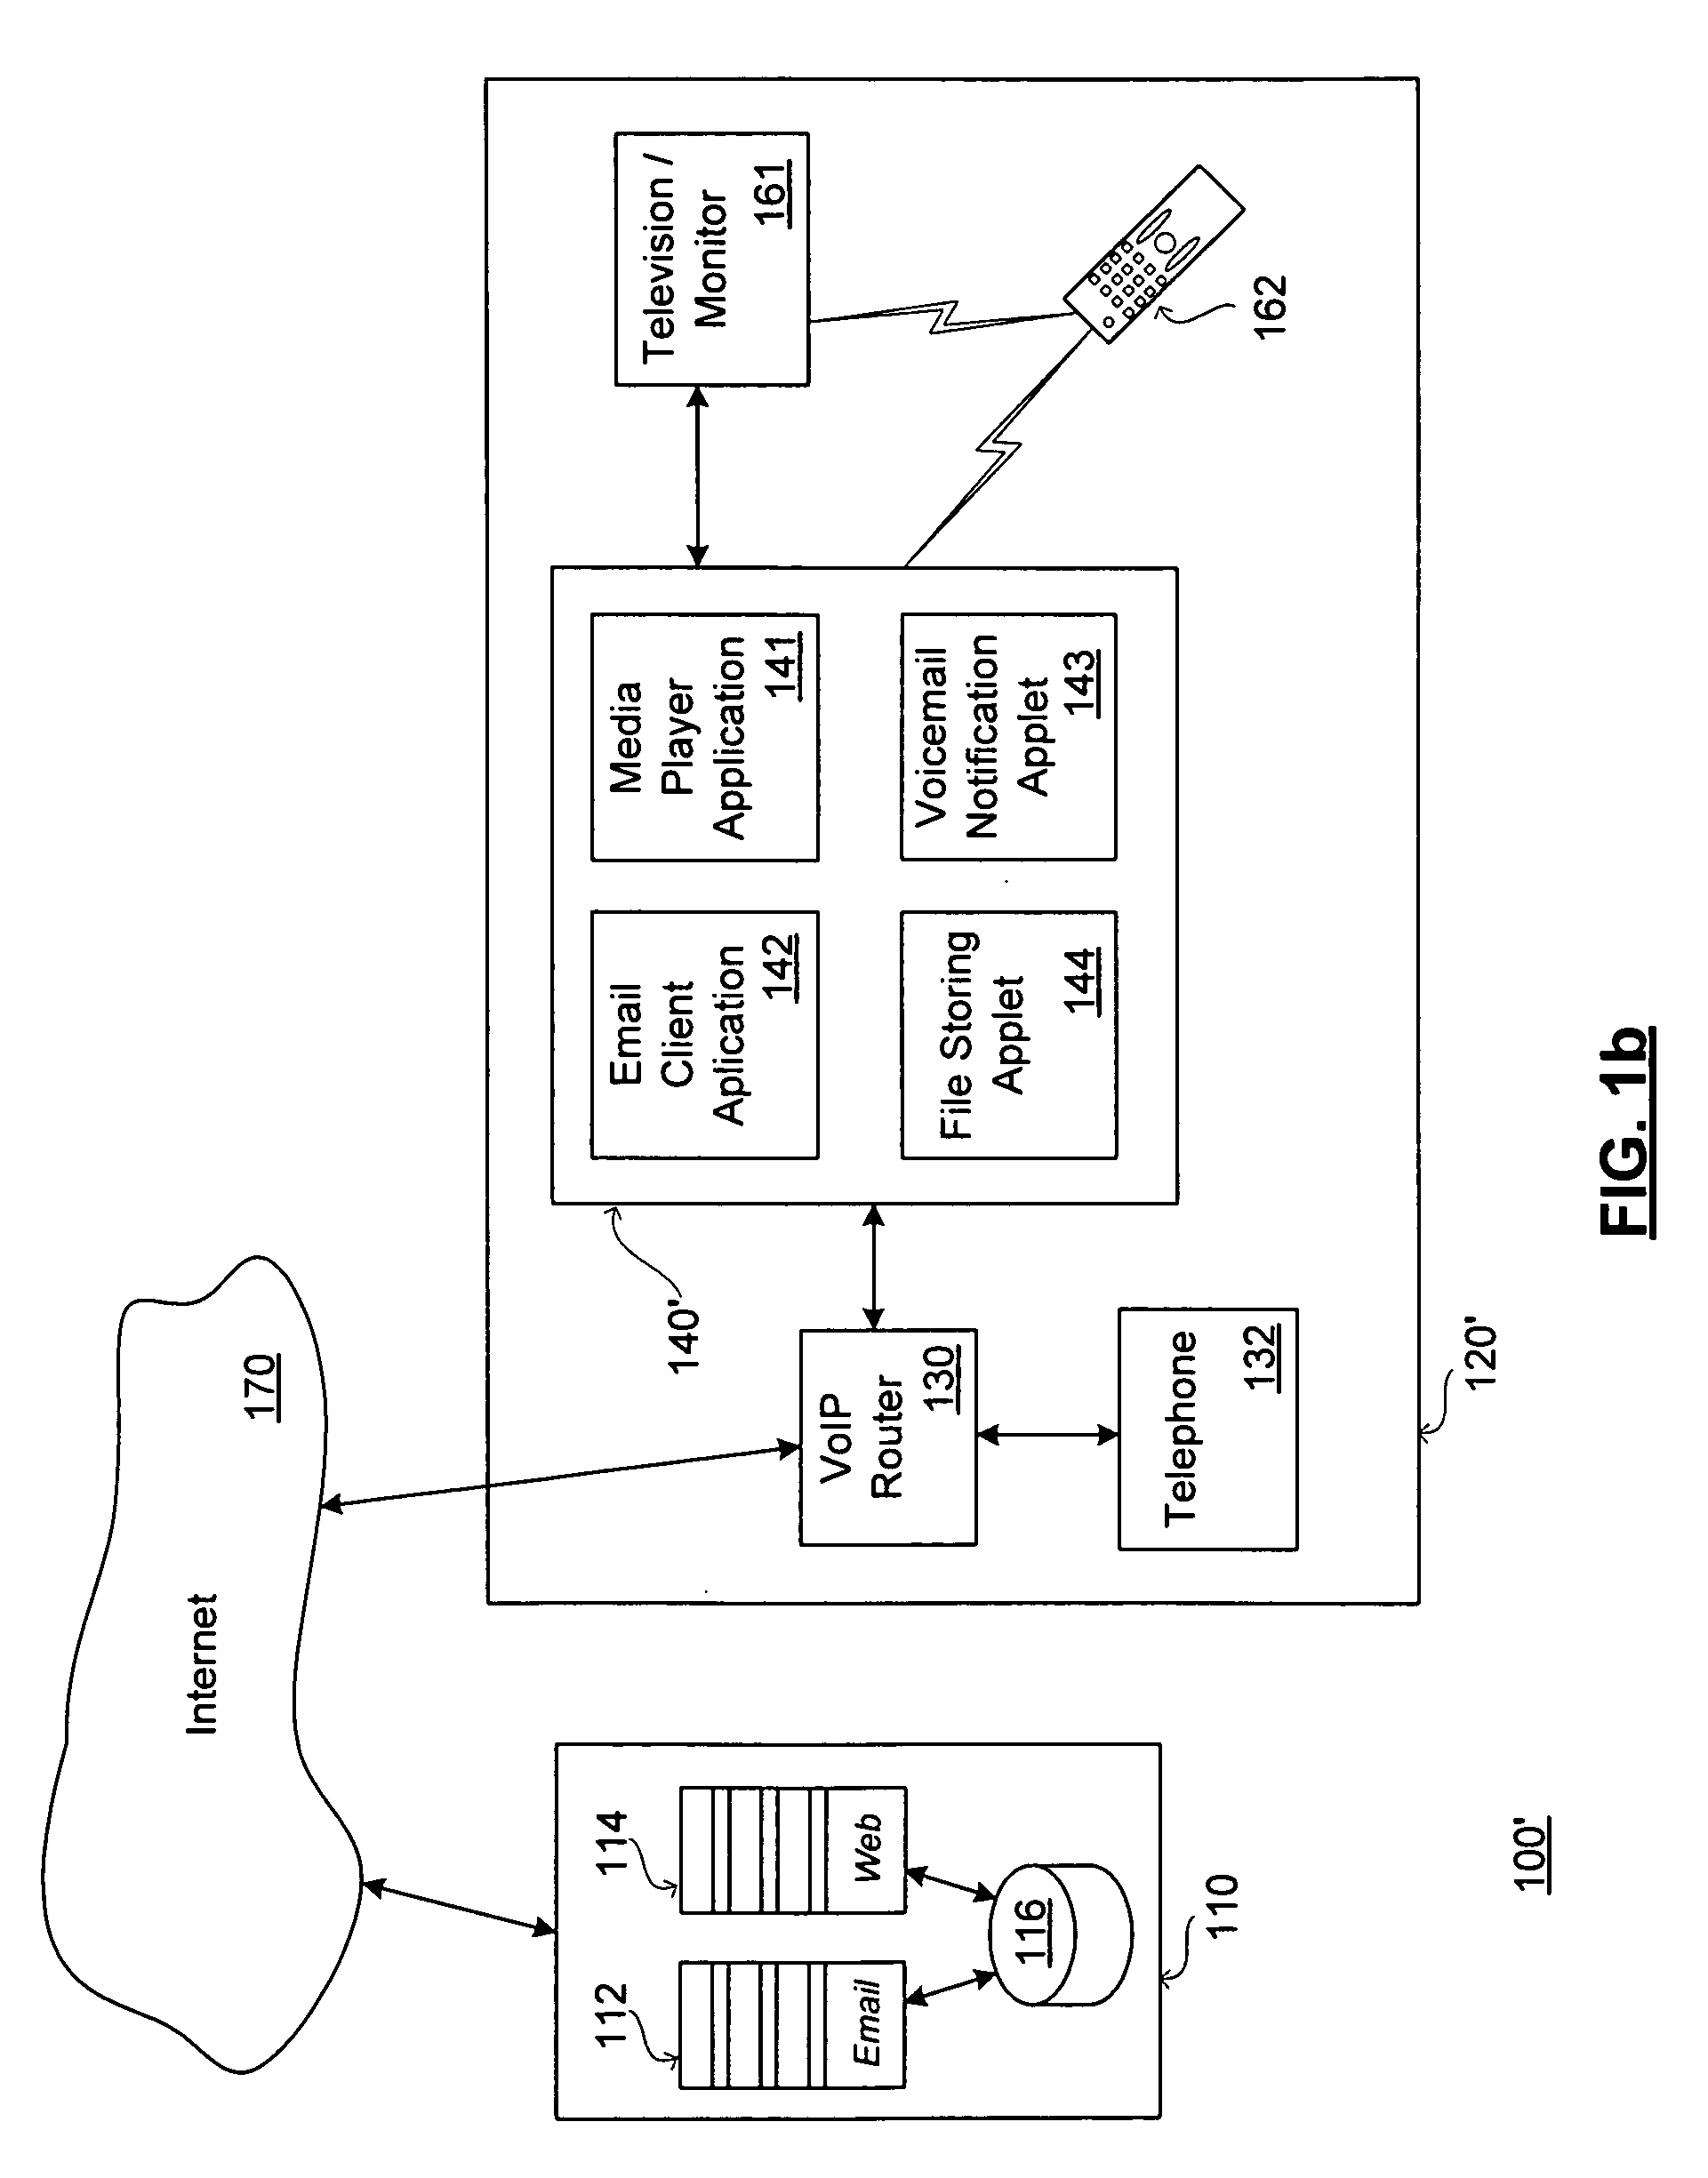 Voicemail interface system and method